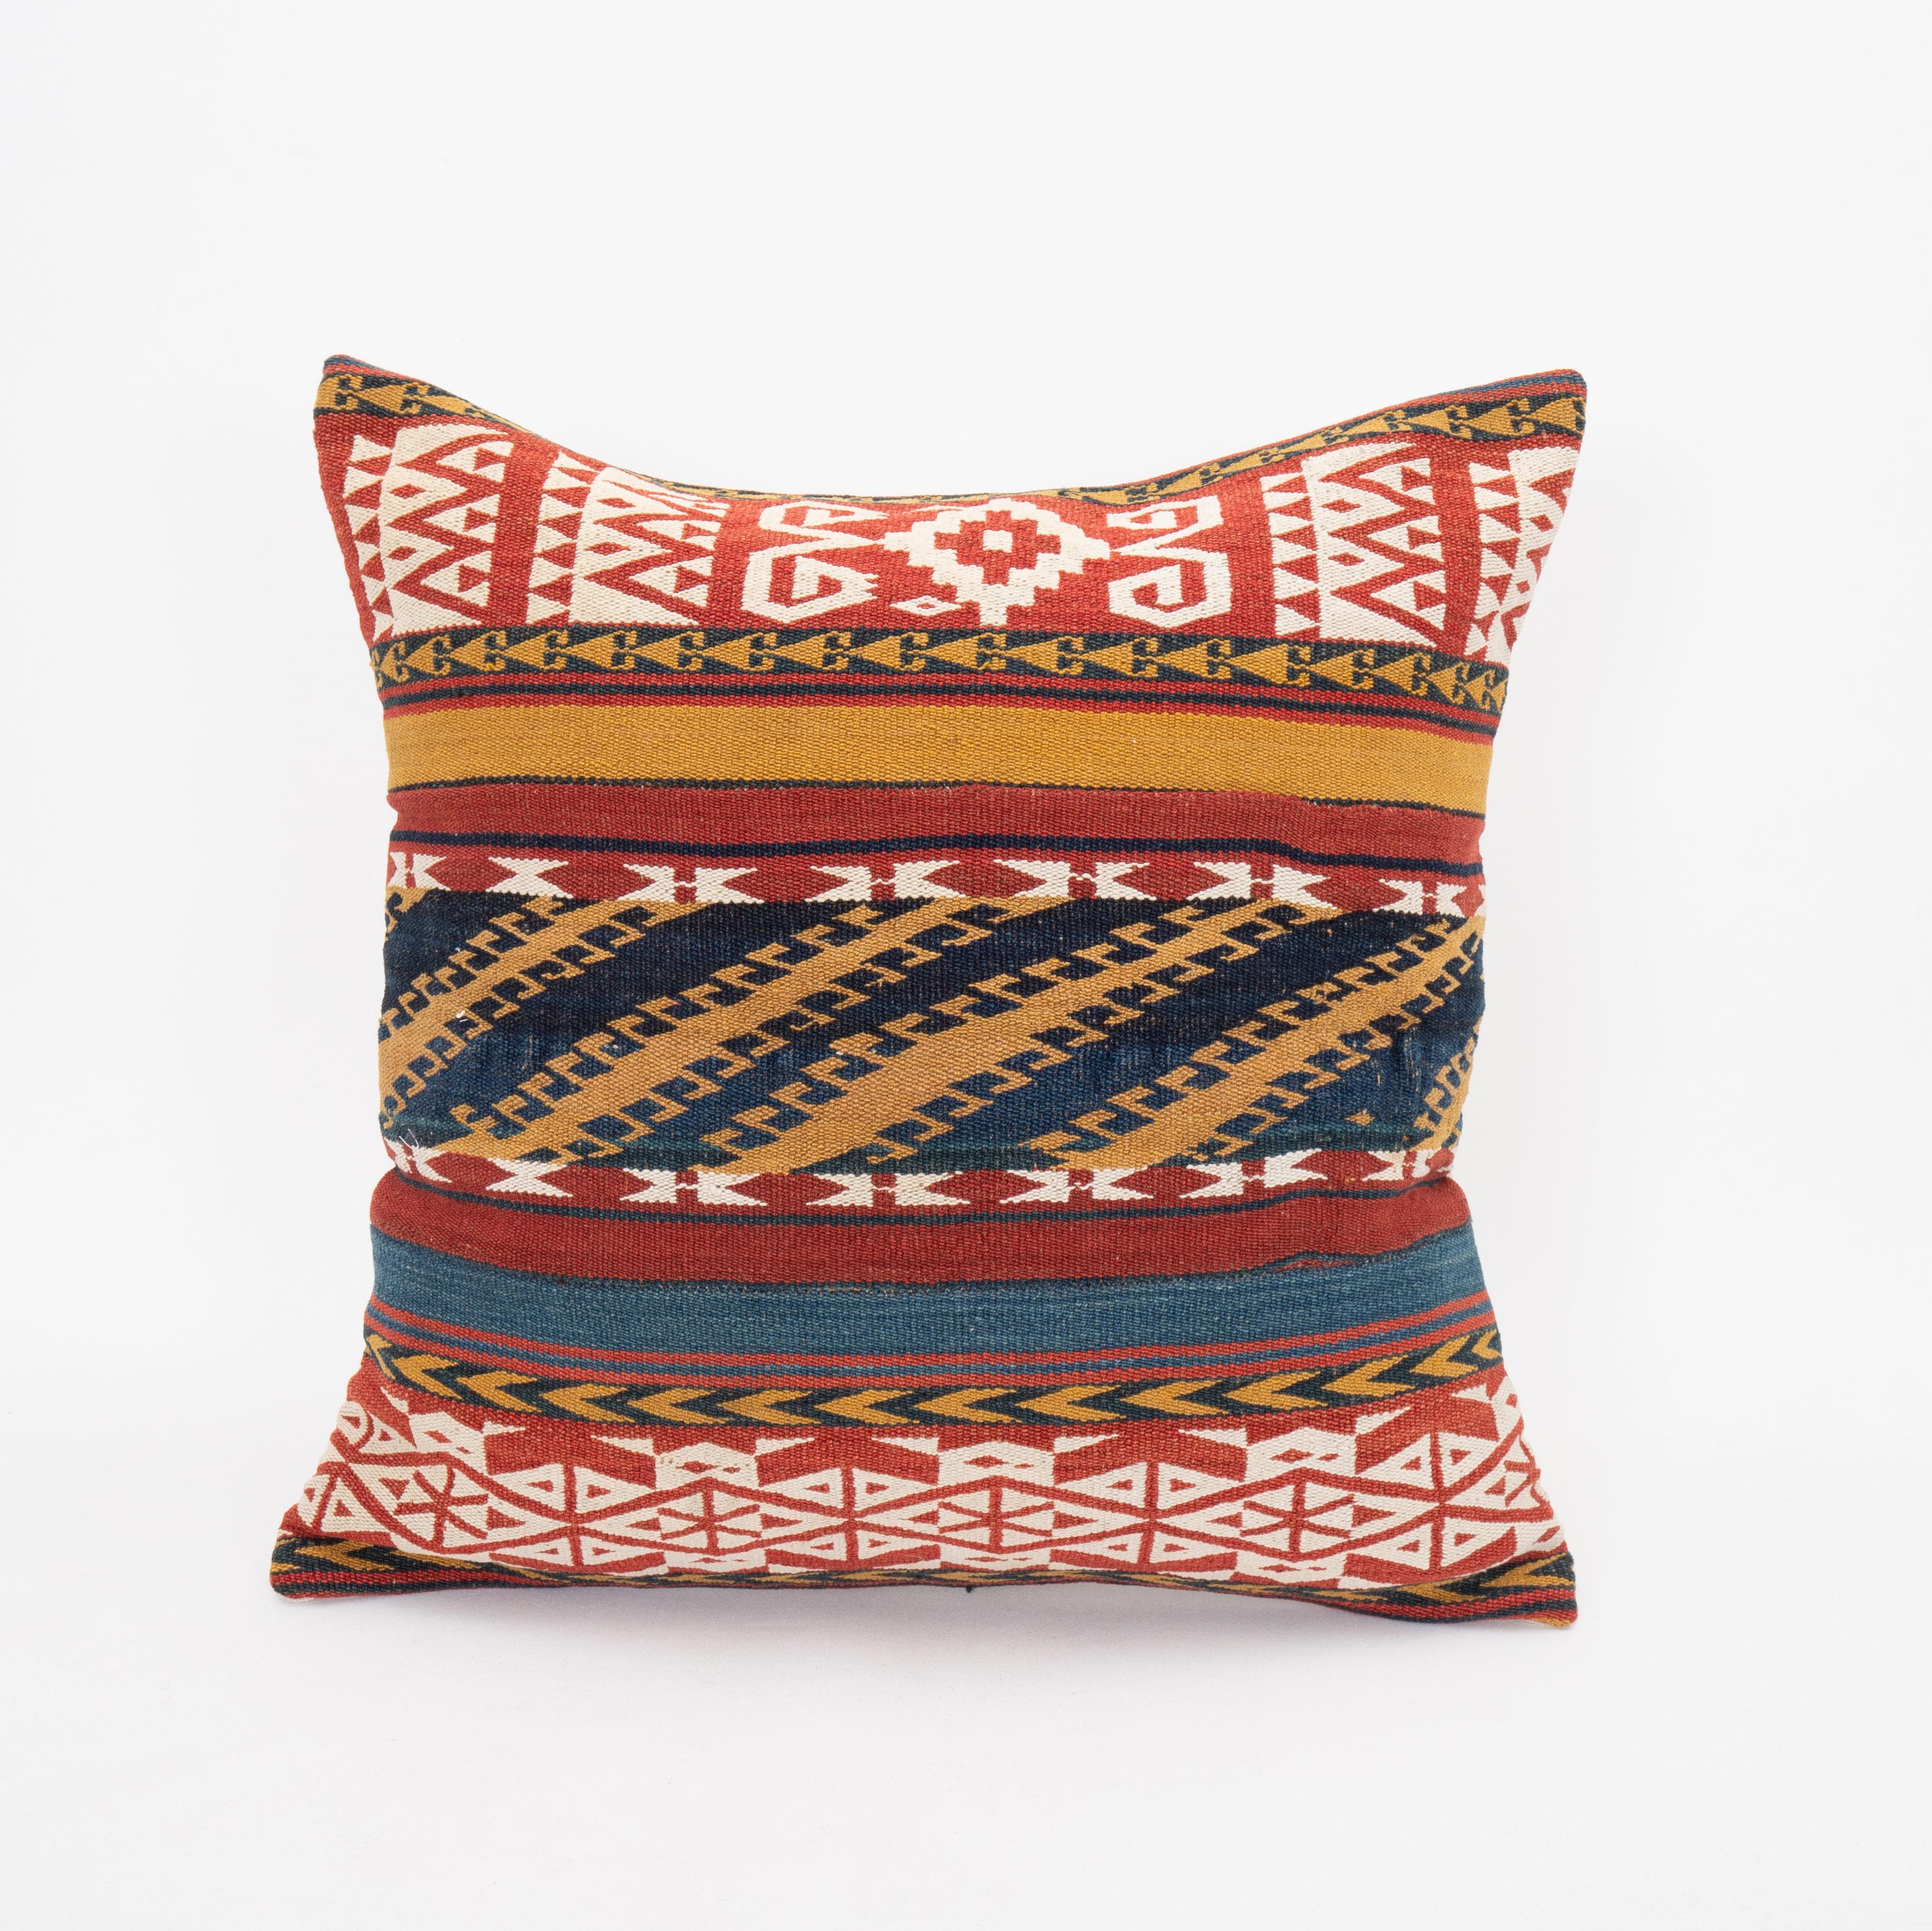 This pillowcase was made from a Central Asian , Uzbek Gudjeri ( jajim ) kilim, late 19th C.
It does not come with an insert. 
Zipper closure.
Der clean recommended.
